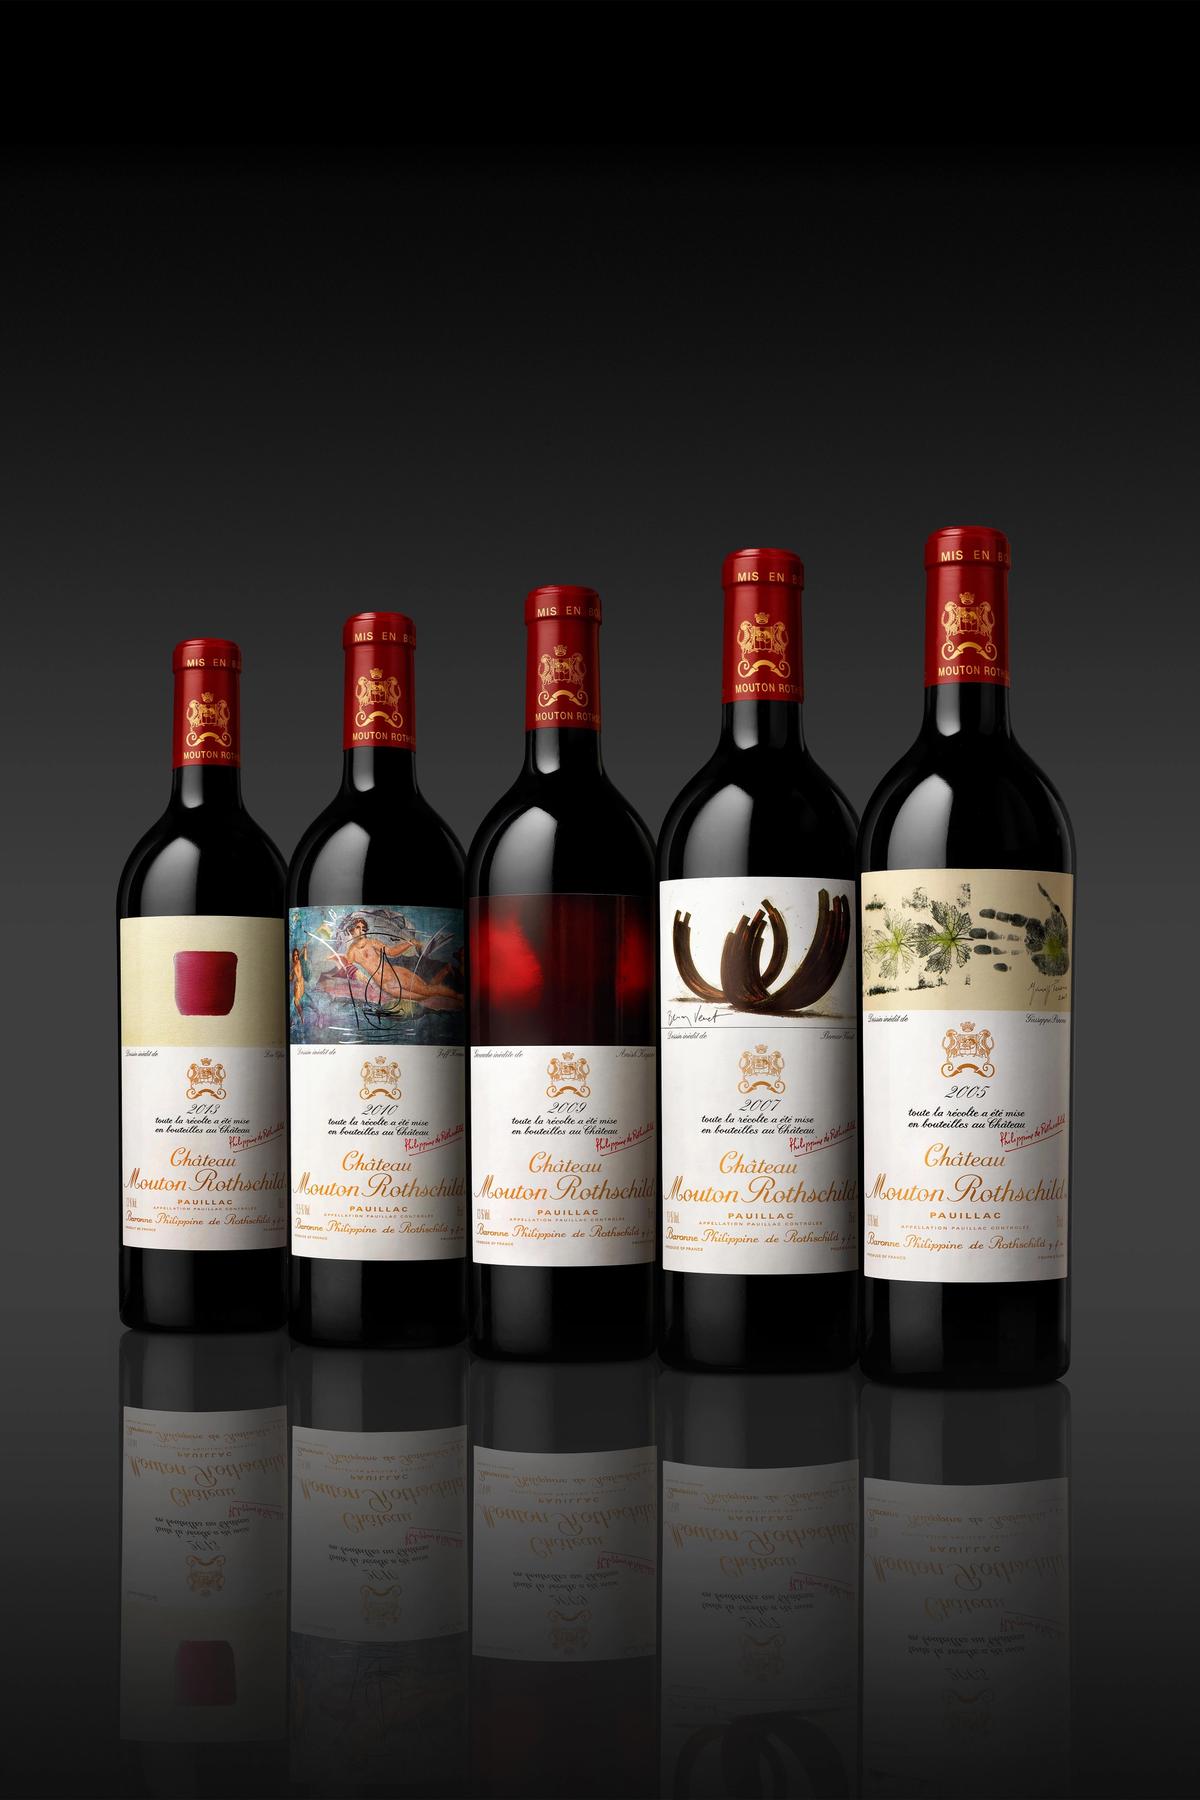 Château Mouton Rothschild vintages included in the Versailles Celebration case courtesy Deepix, Château Mouton Rothschild